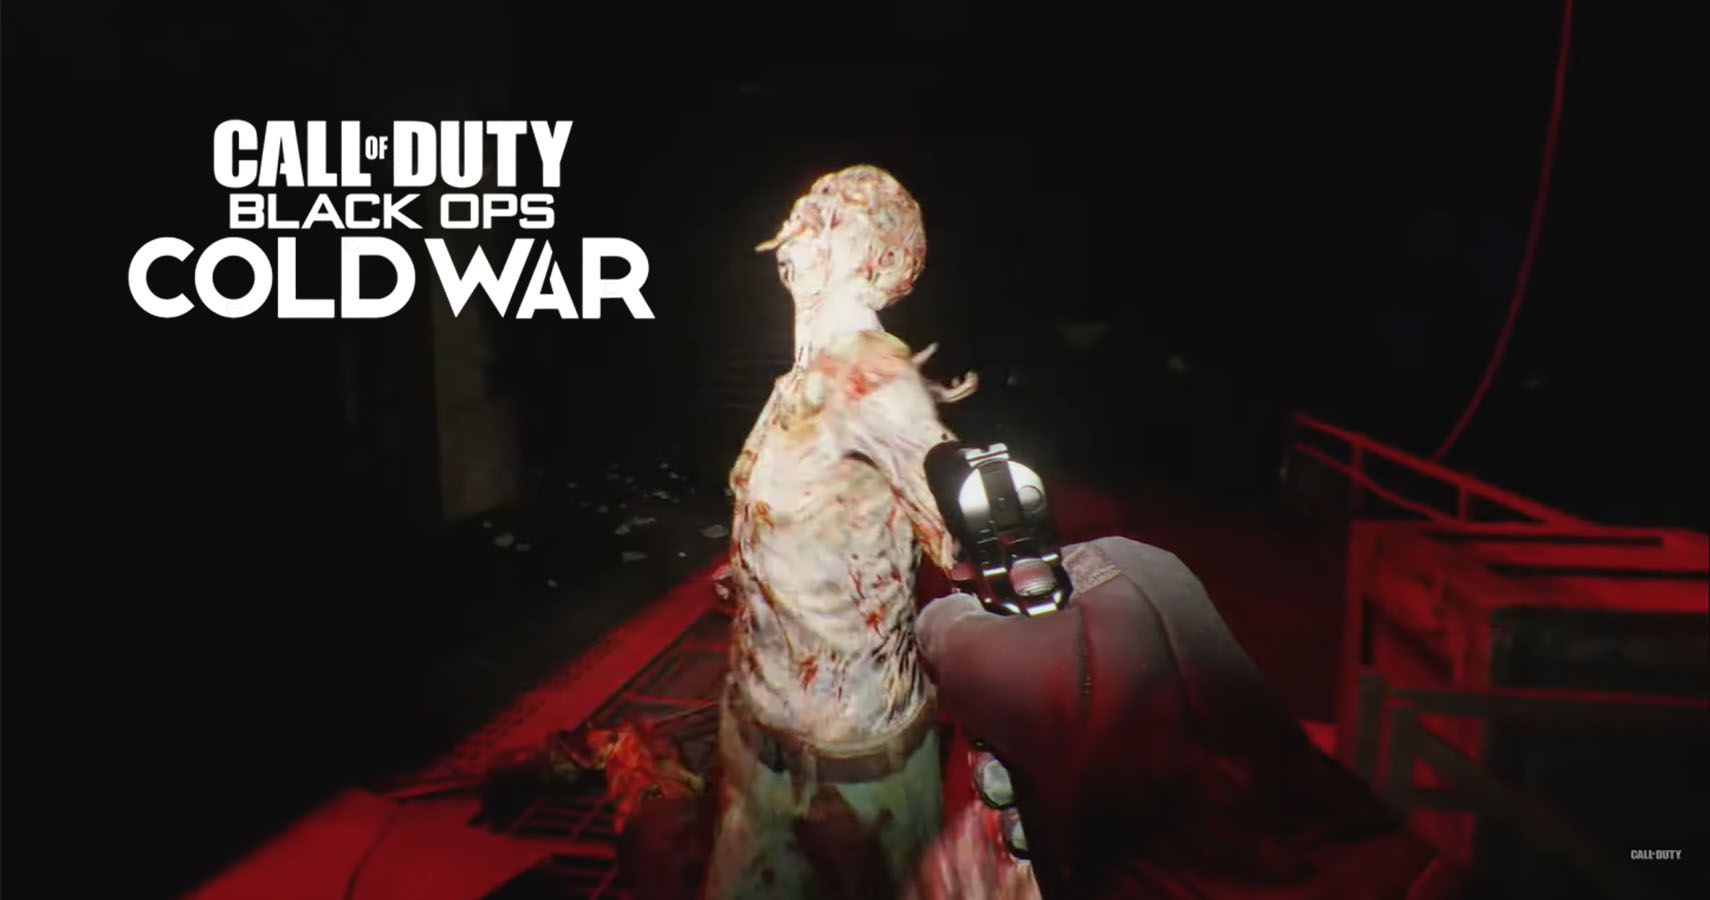 Call Of Duty Black Ops Cold Wars Zombies Mode Gets A Gameplay Tease